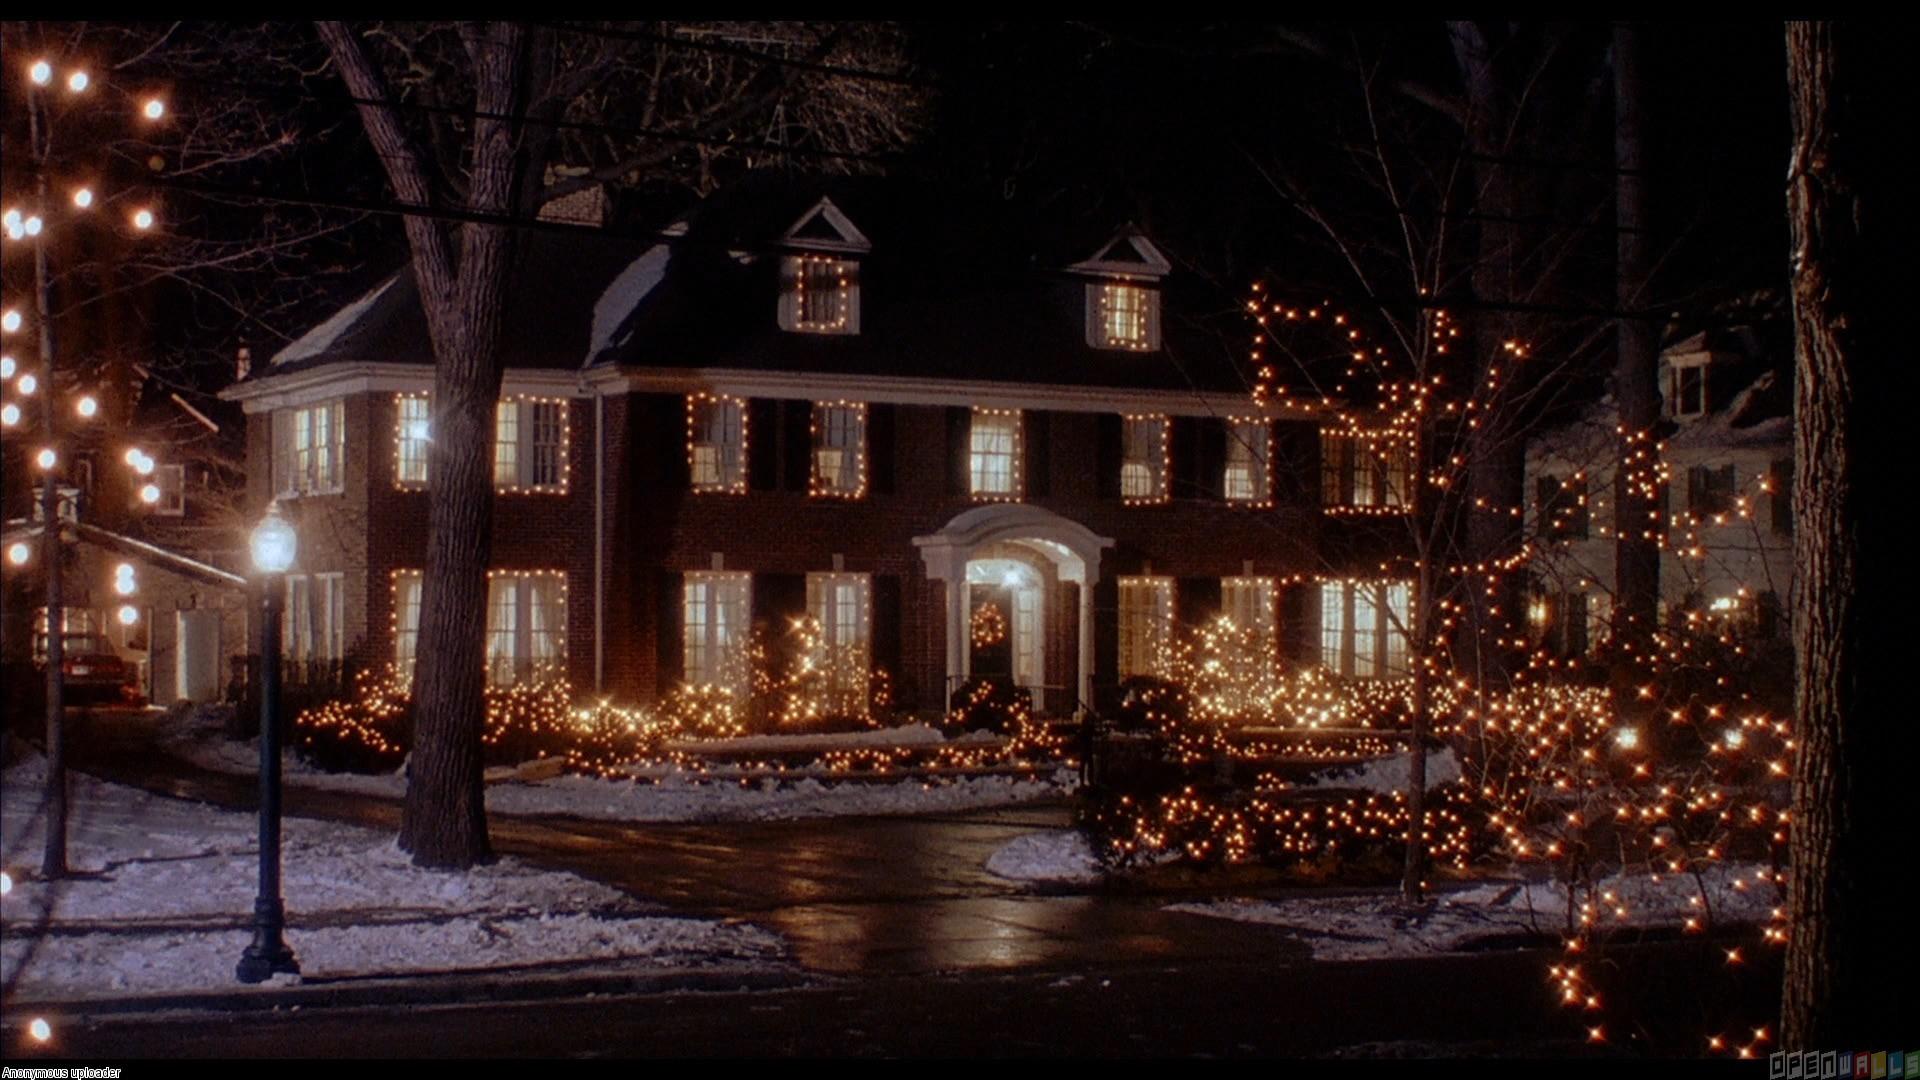 Holiday Movie Homes that Bring Back Old Memories